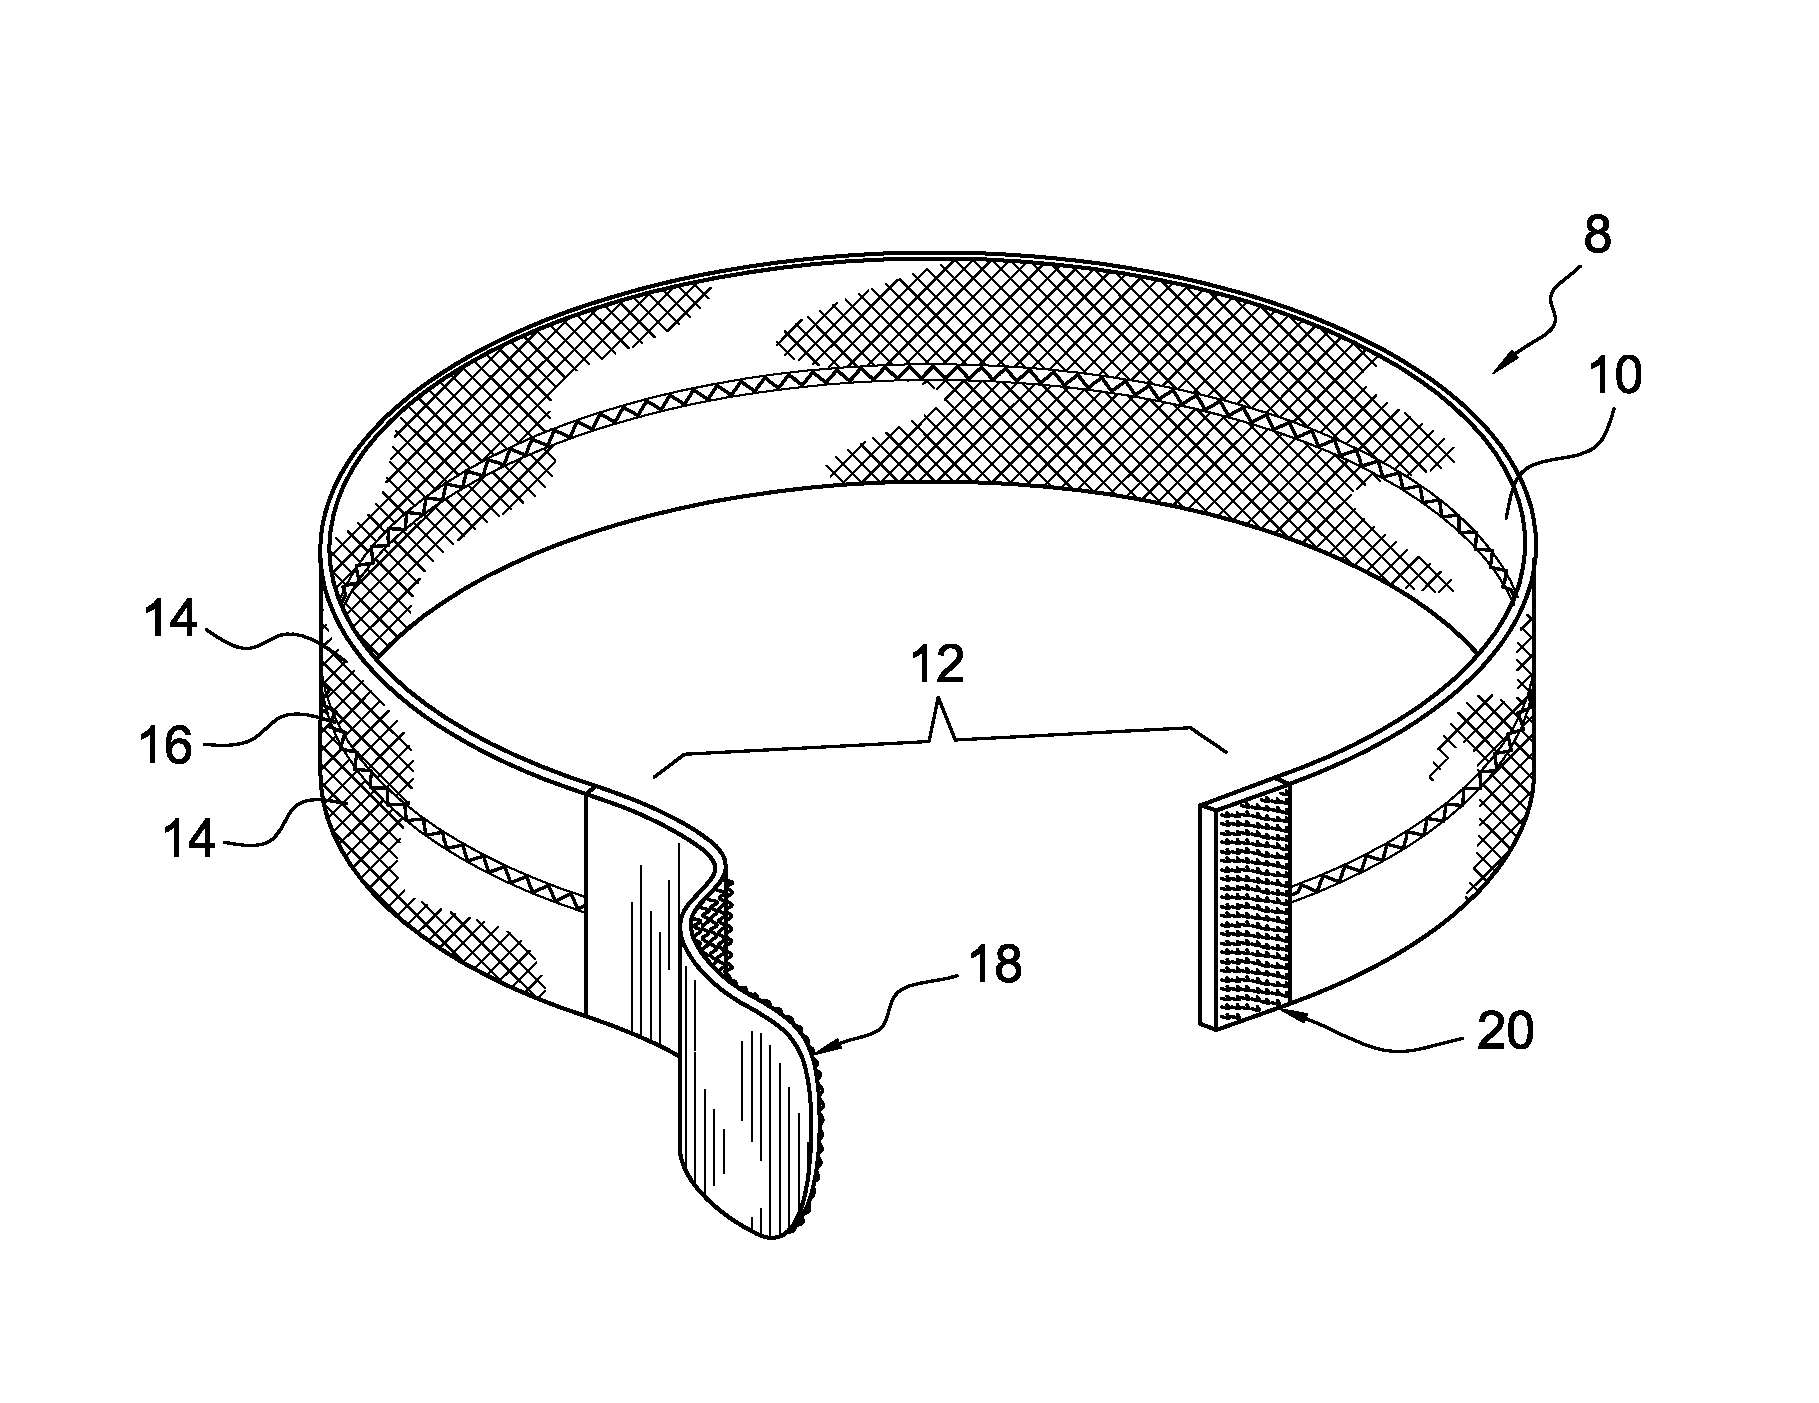 Method and apparatus for tensile colonoscopy compression